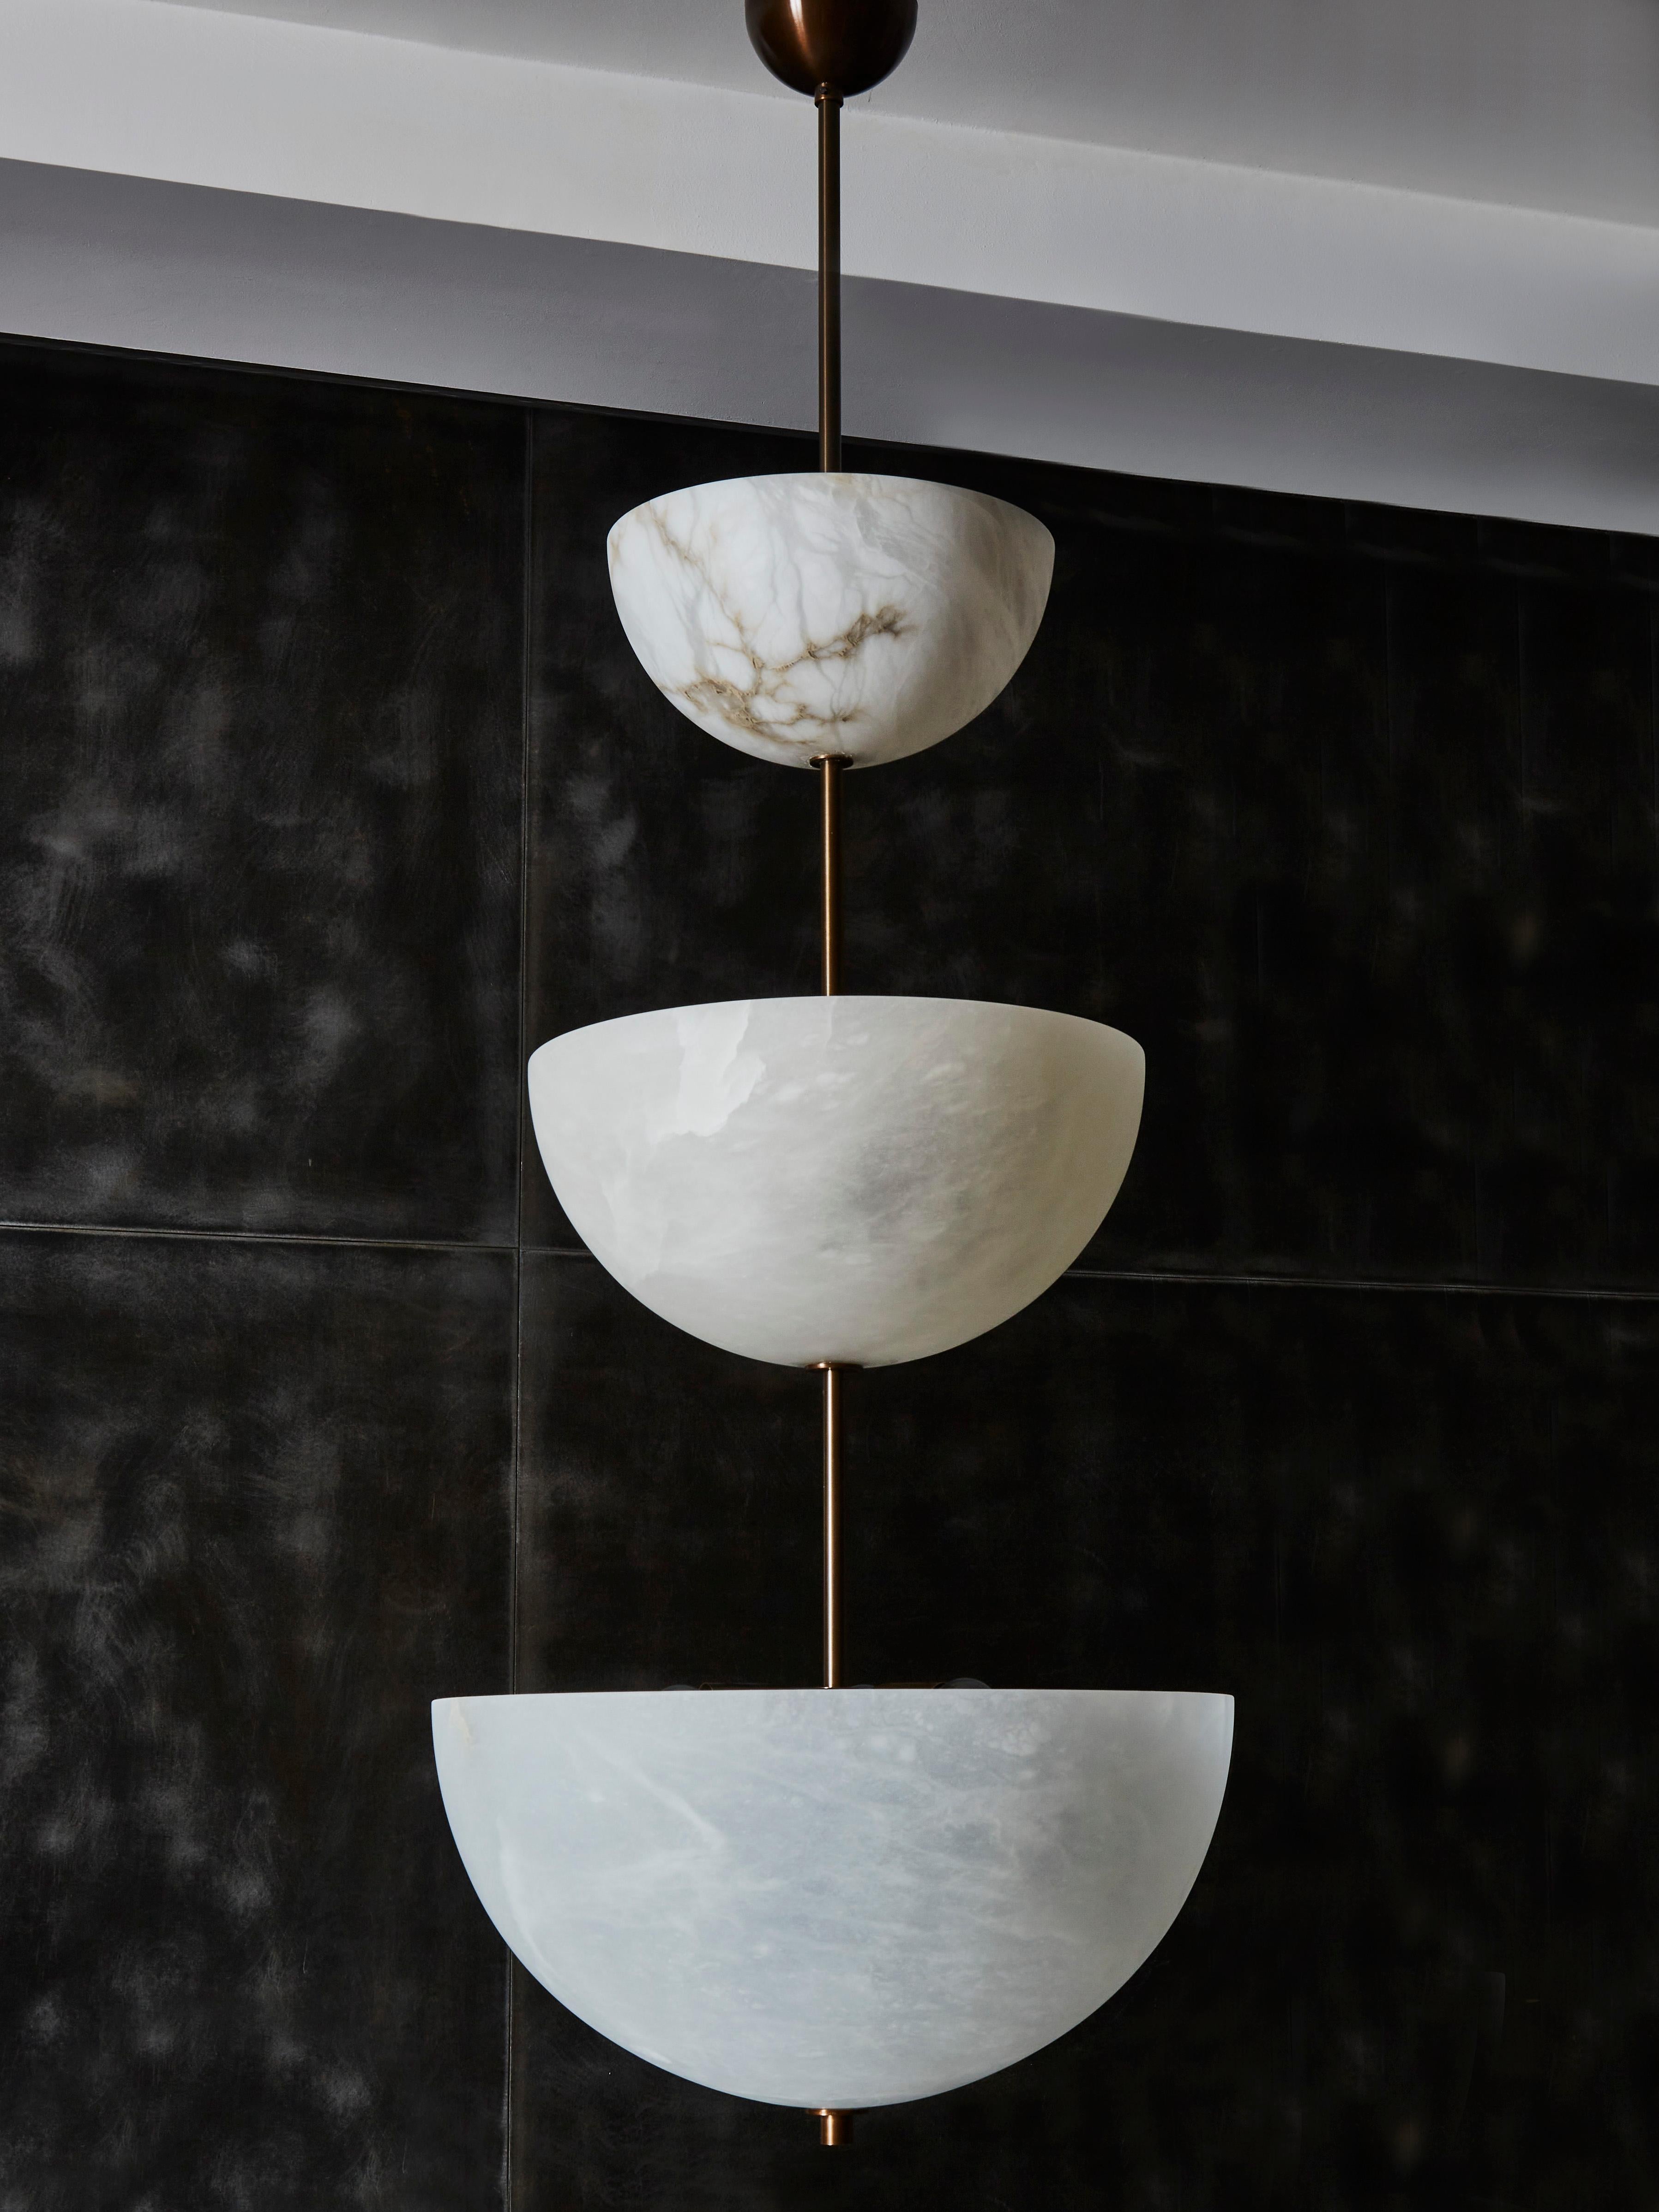 Three alabaster half spheres of different sizes are vertically stacked on each other with a brass stem.

Each bowl has several light sources inside.

Original design by Glustin Luminaires.